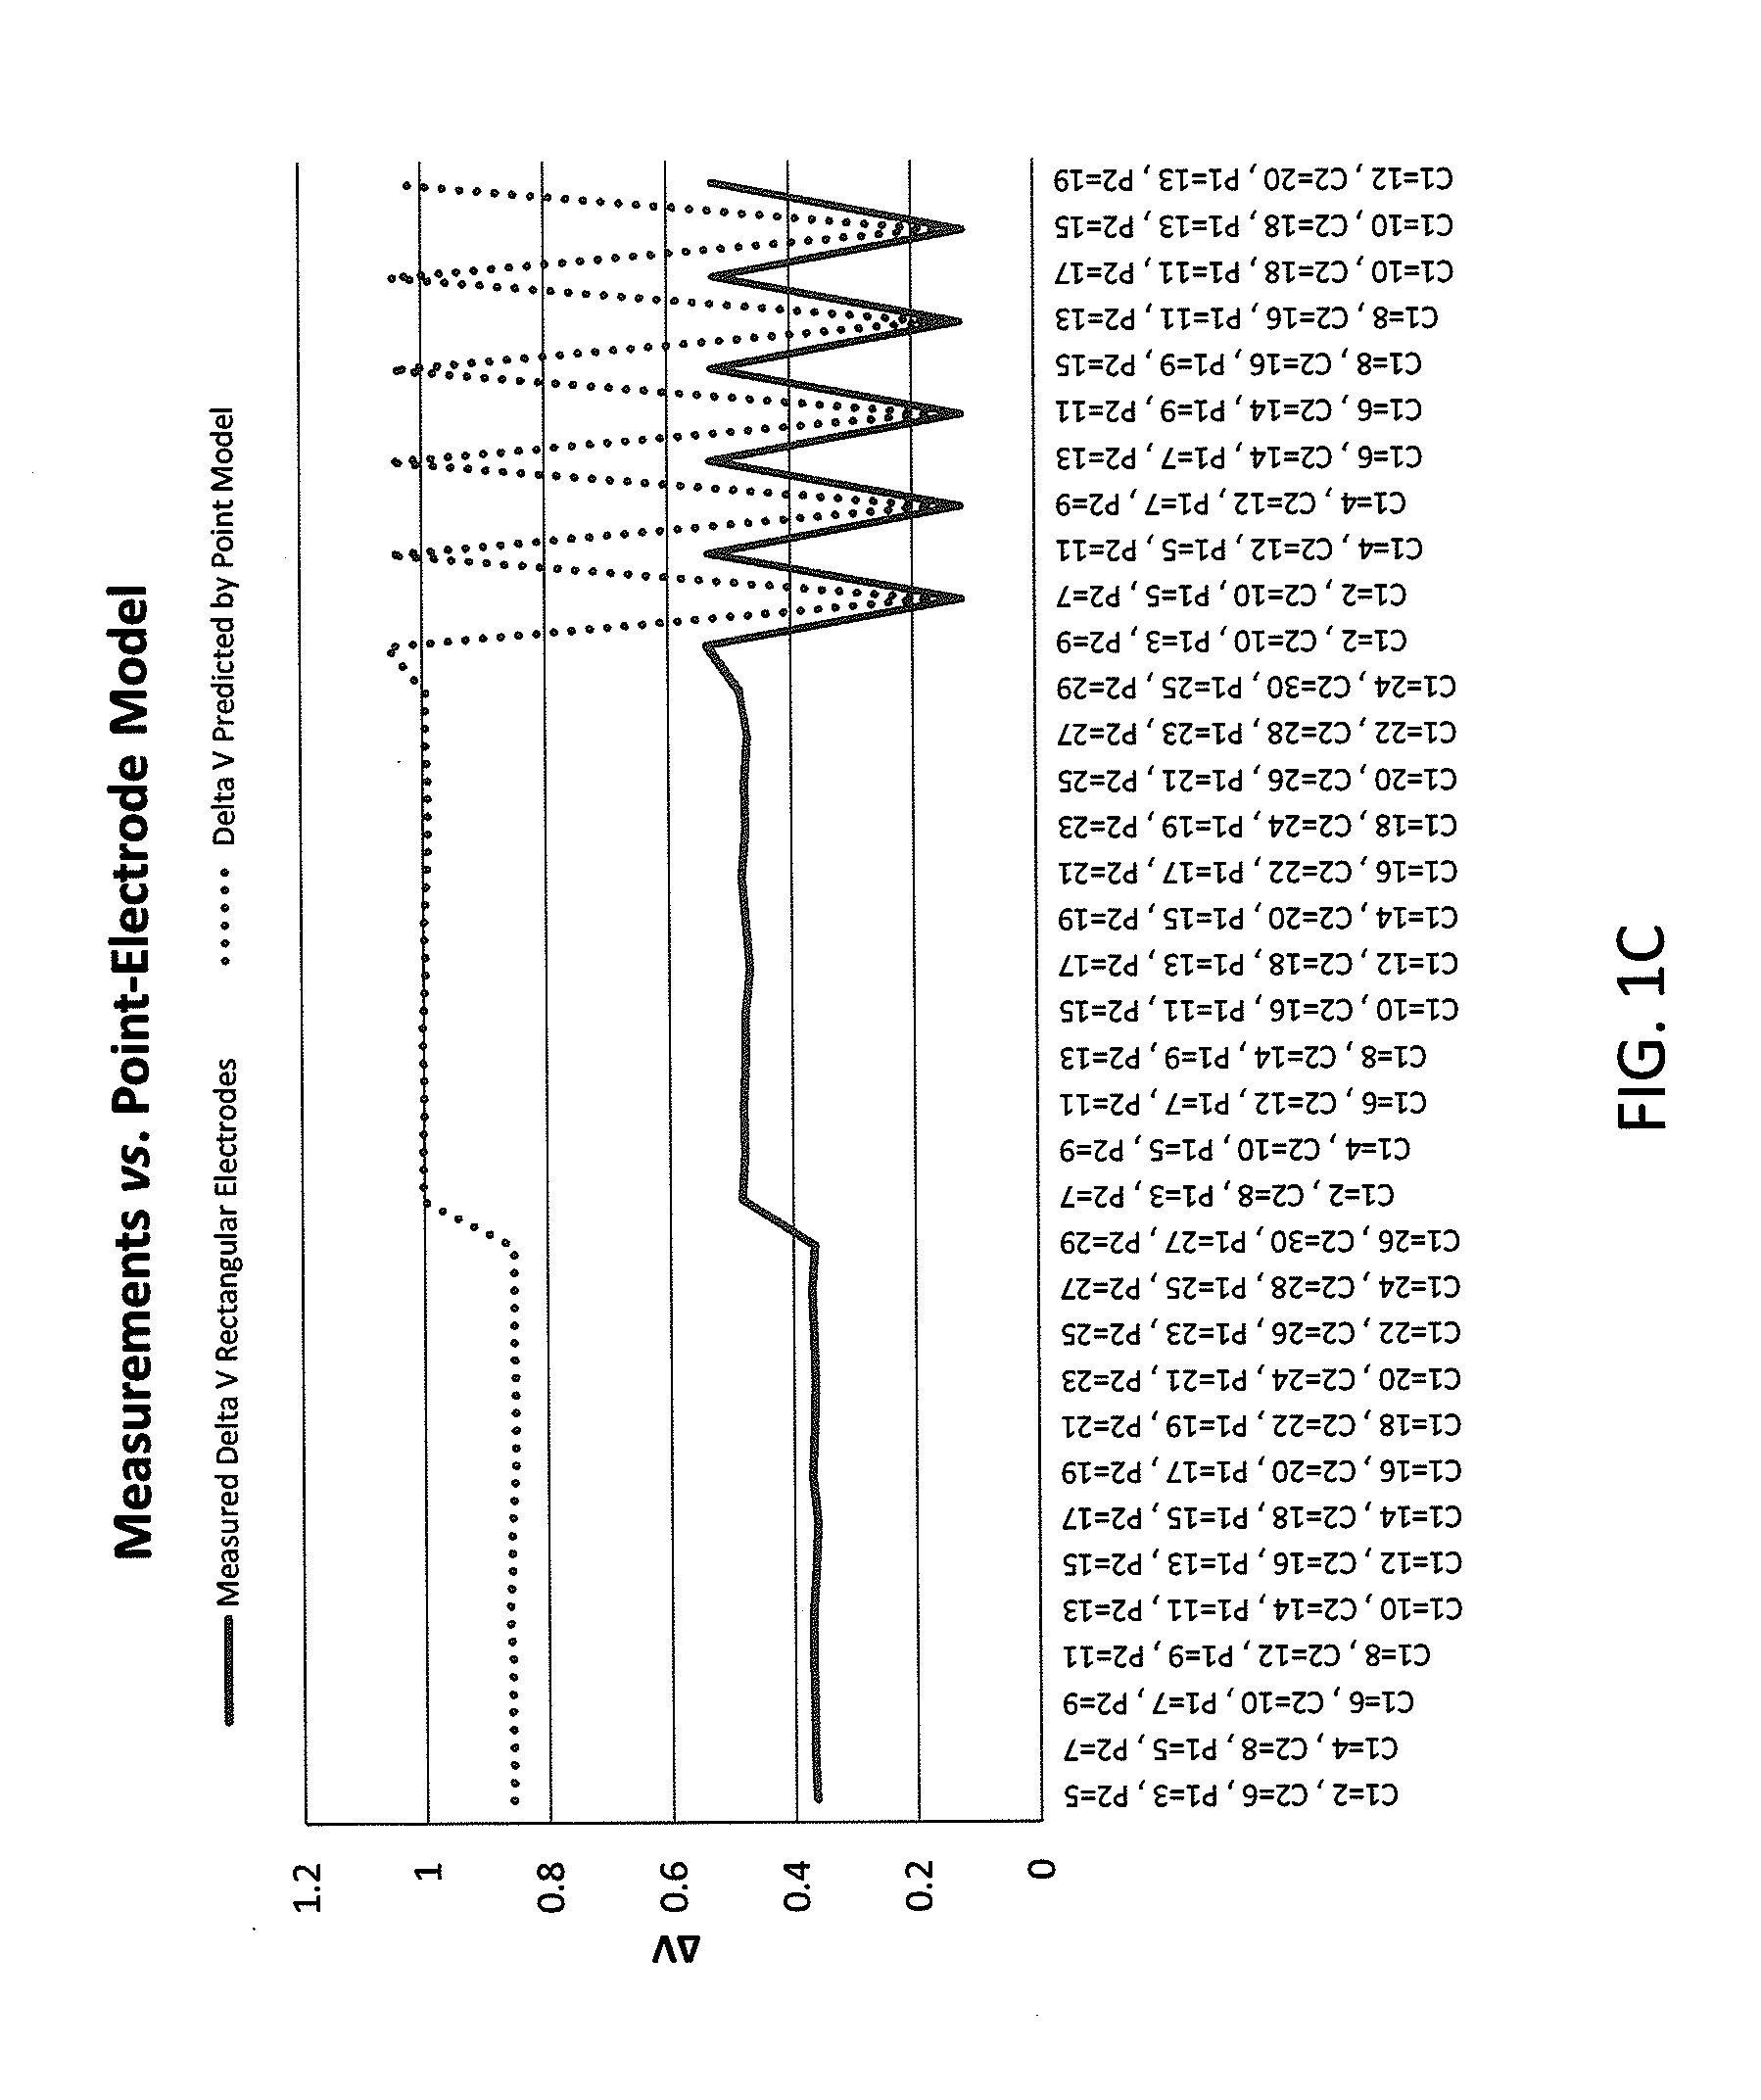 Methods for determining the relative spatial change in subsurface resistivities across frequencies in tissue